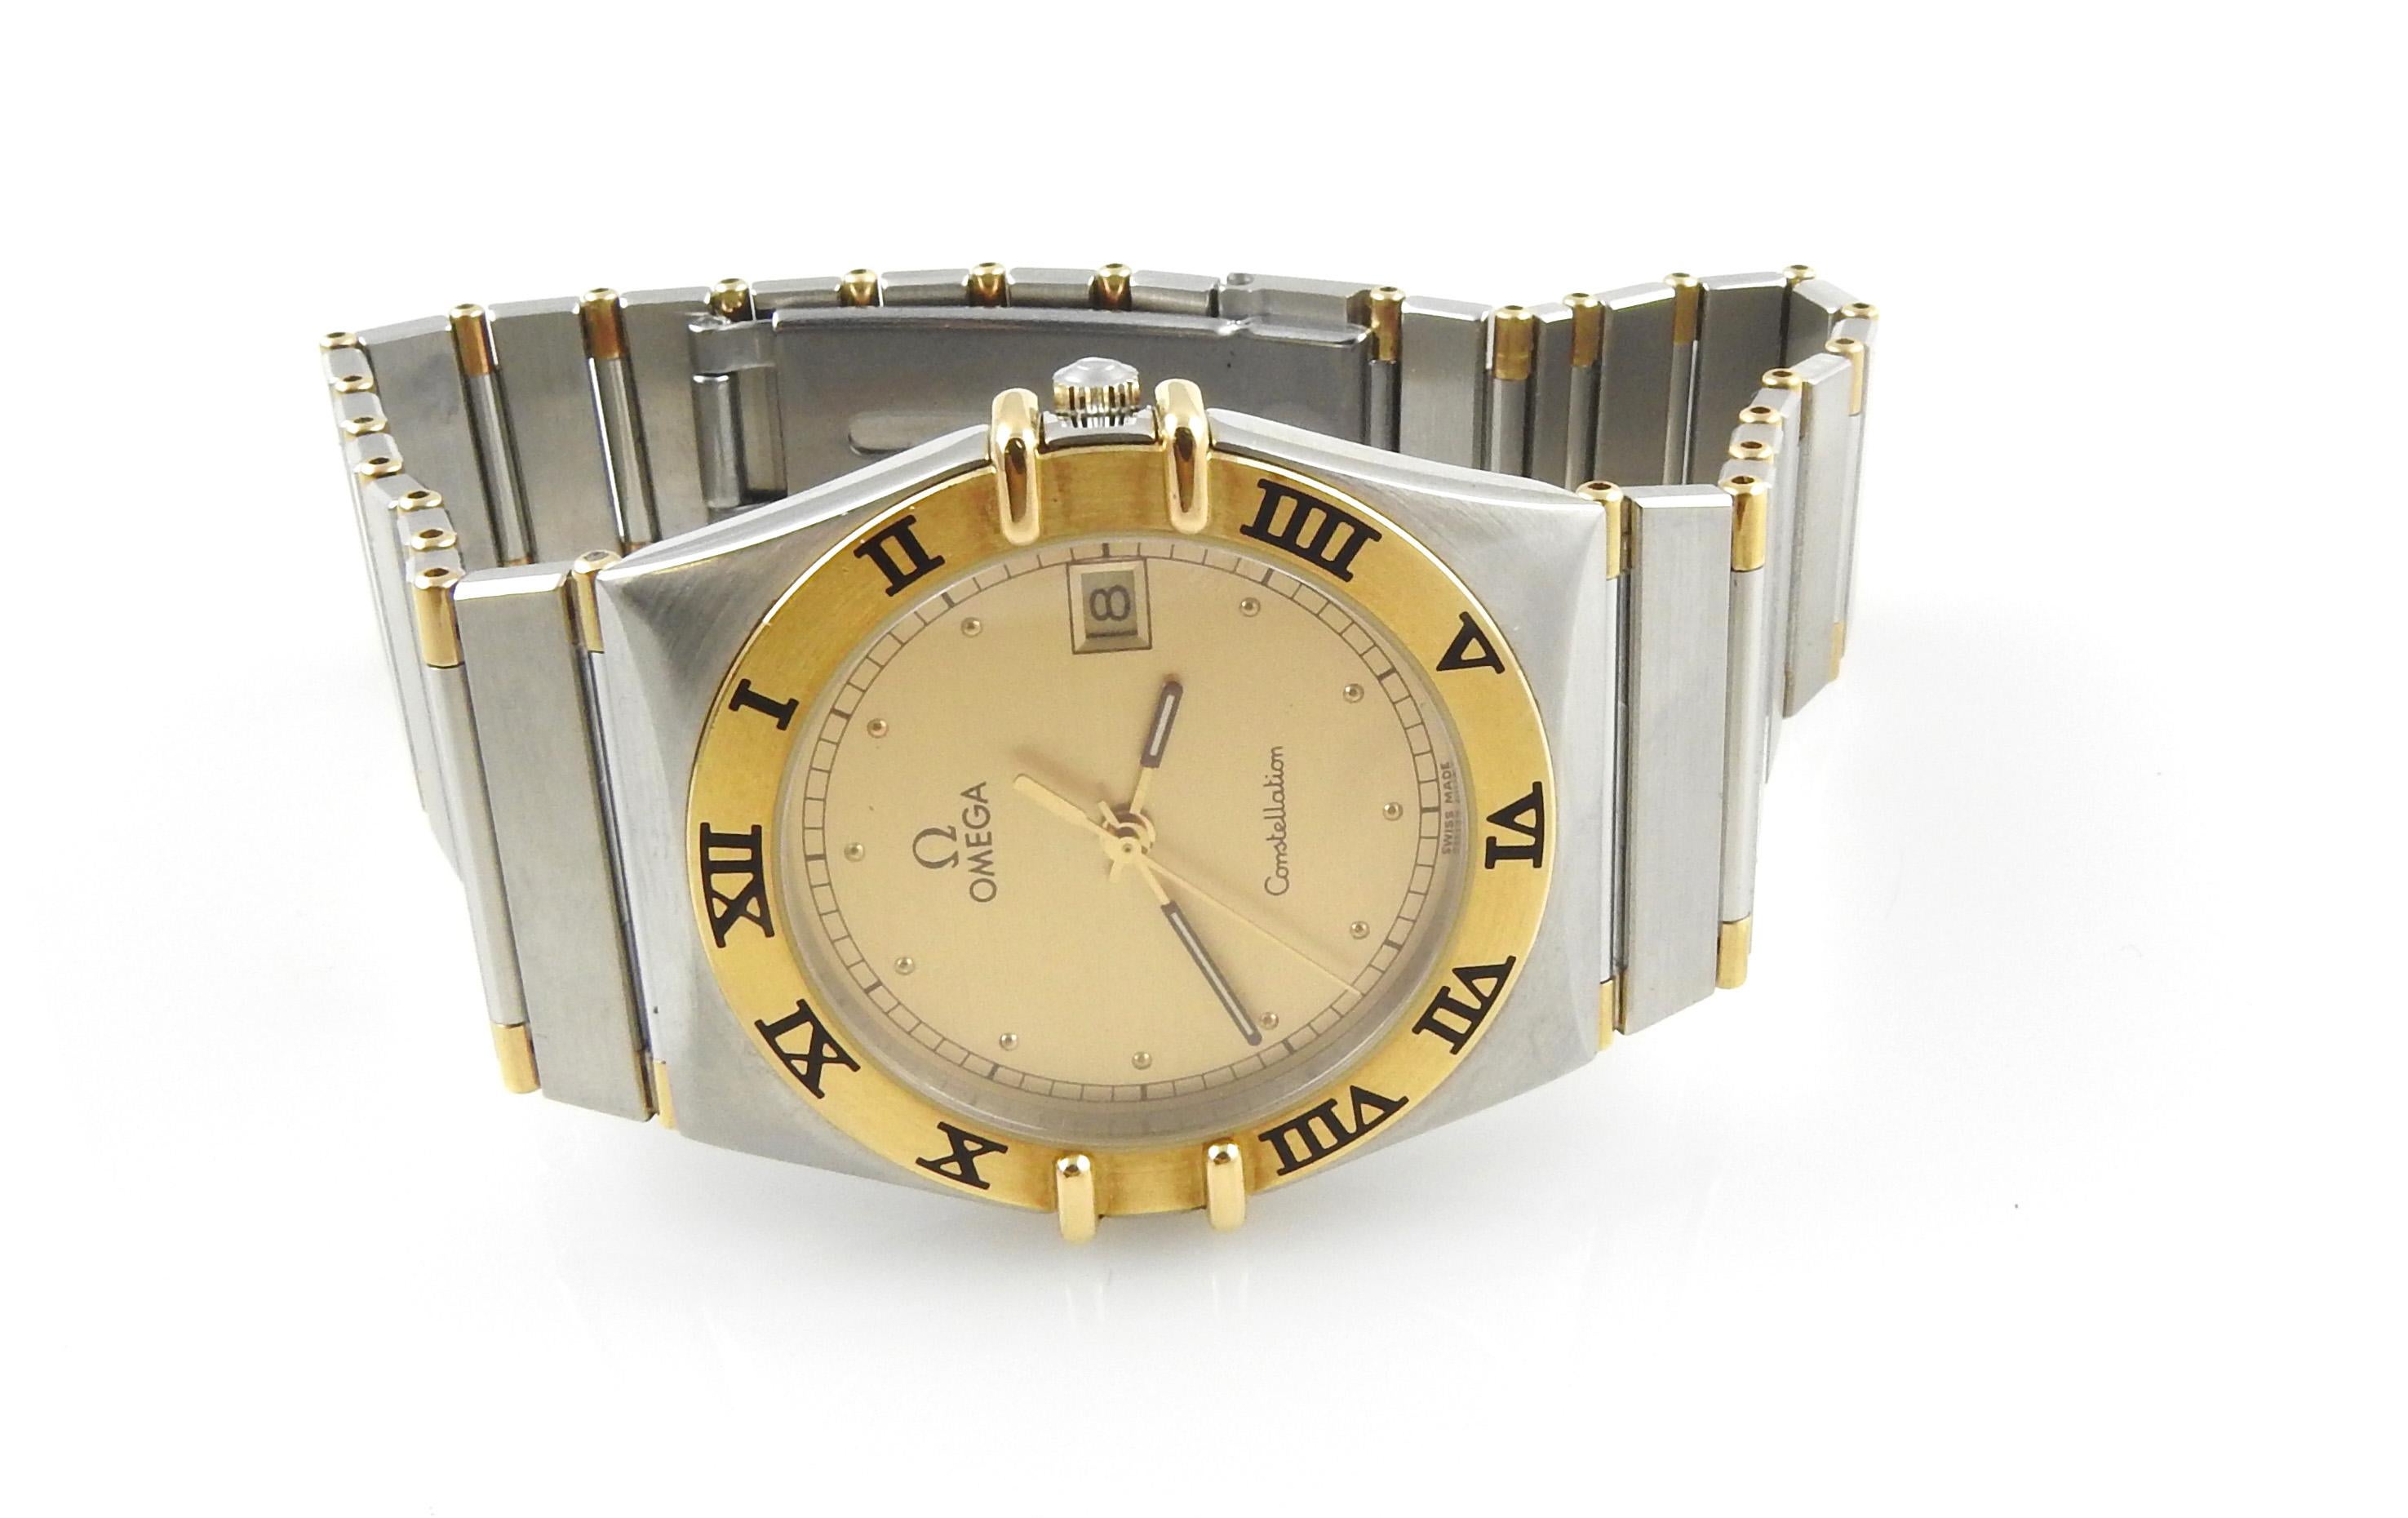 Omega Constellation Men's Watch

This classic men's watch is set in 18K yellow gold and stainless steel.

Stainless steel band has 18K gold half bars.  - fits up to 7.5